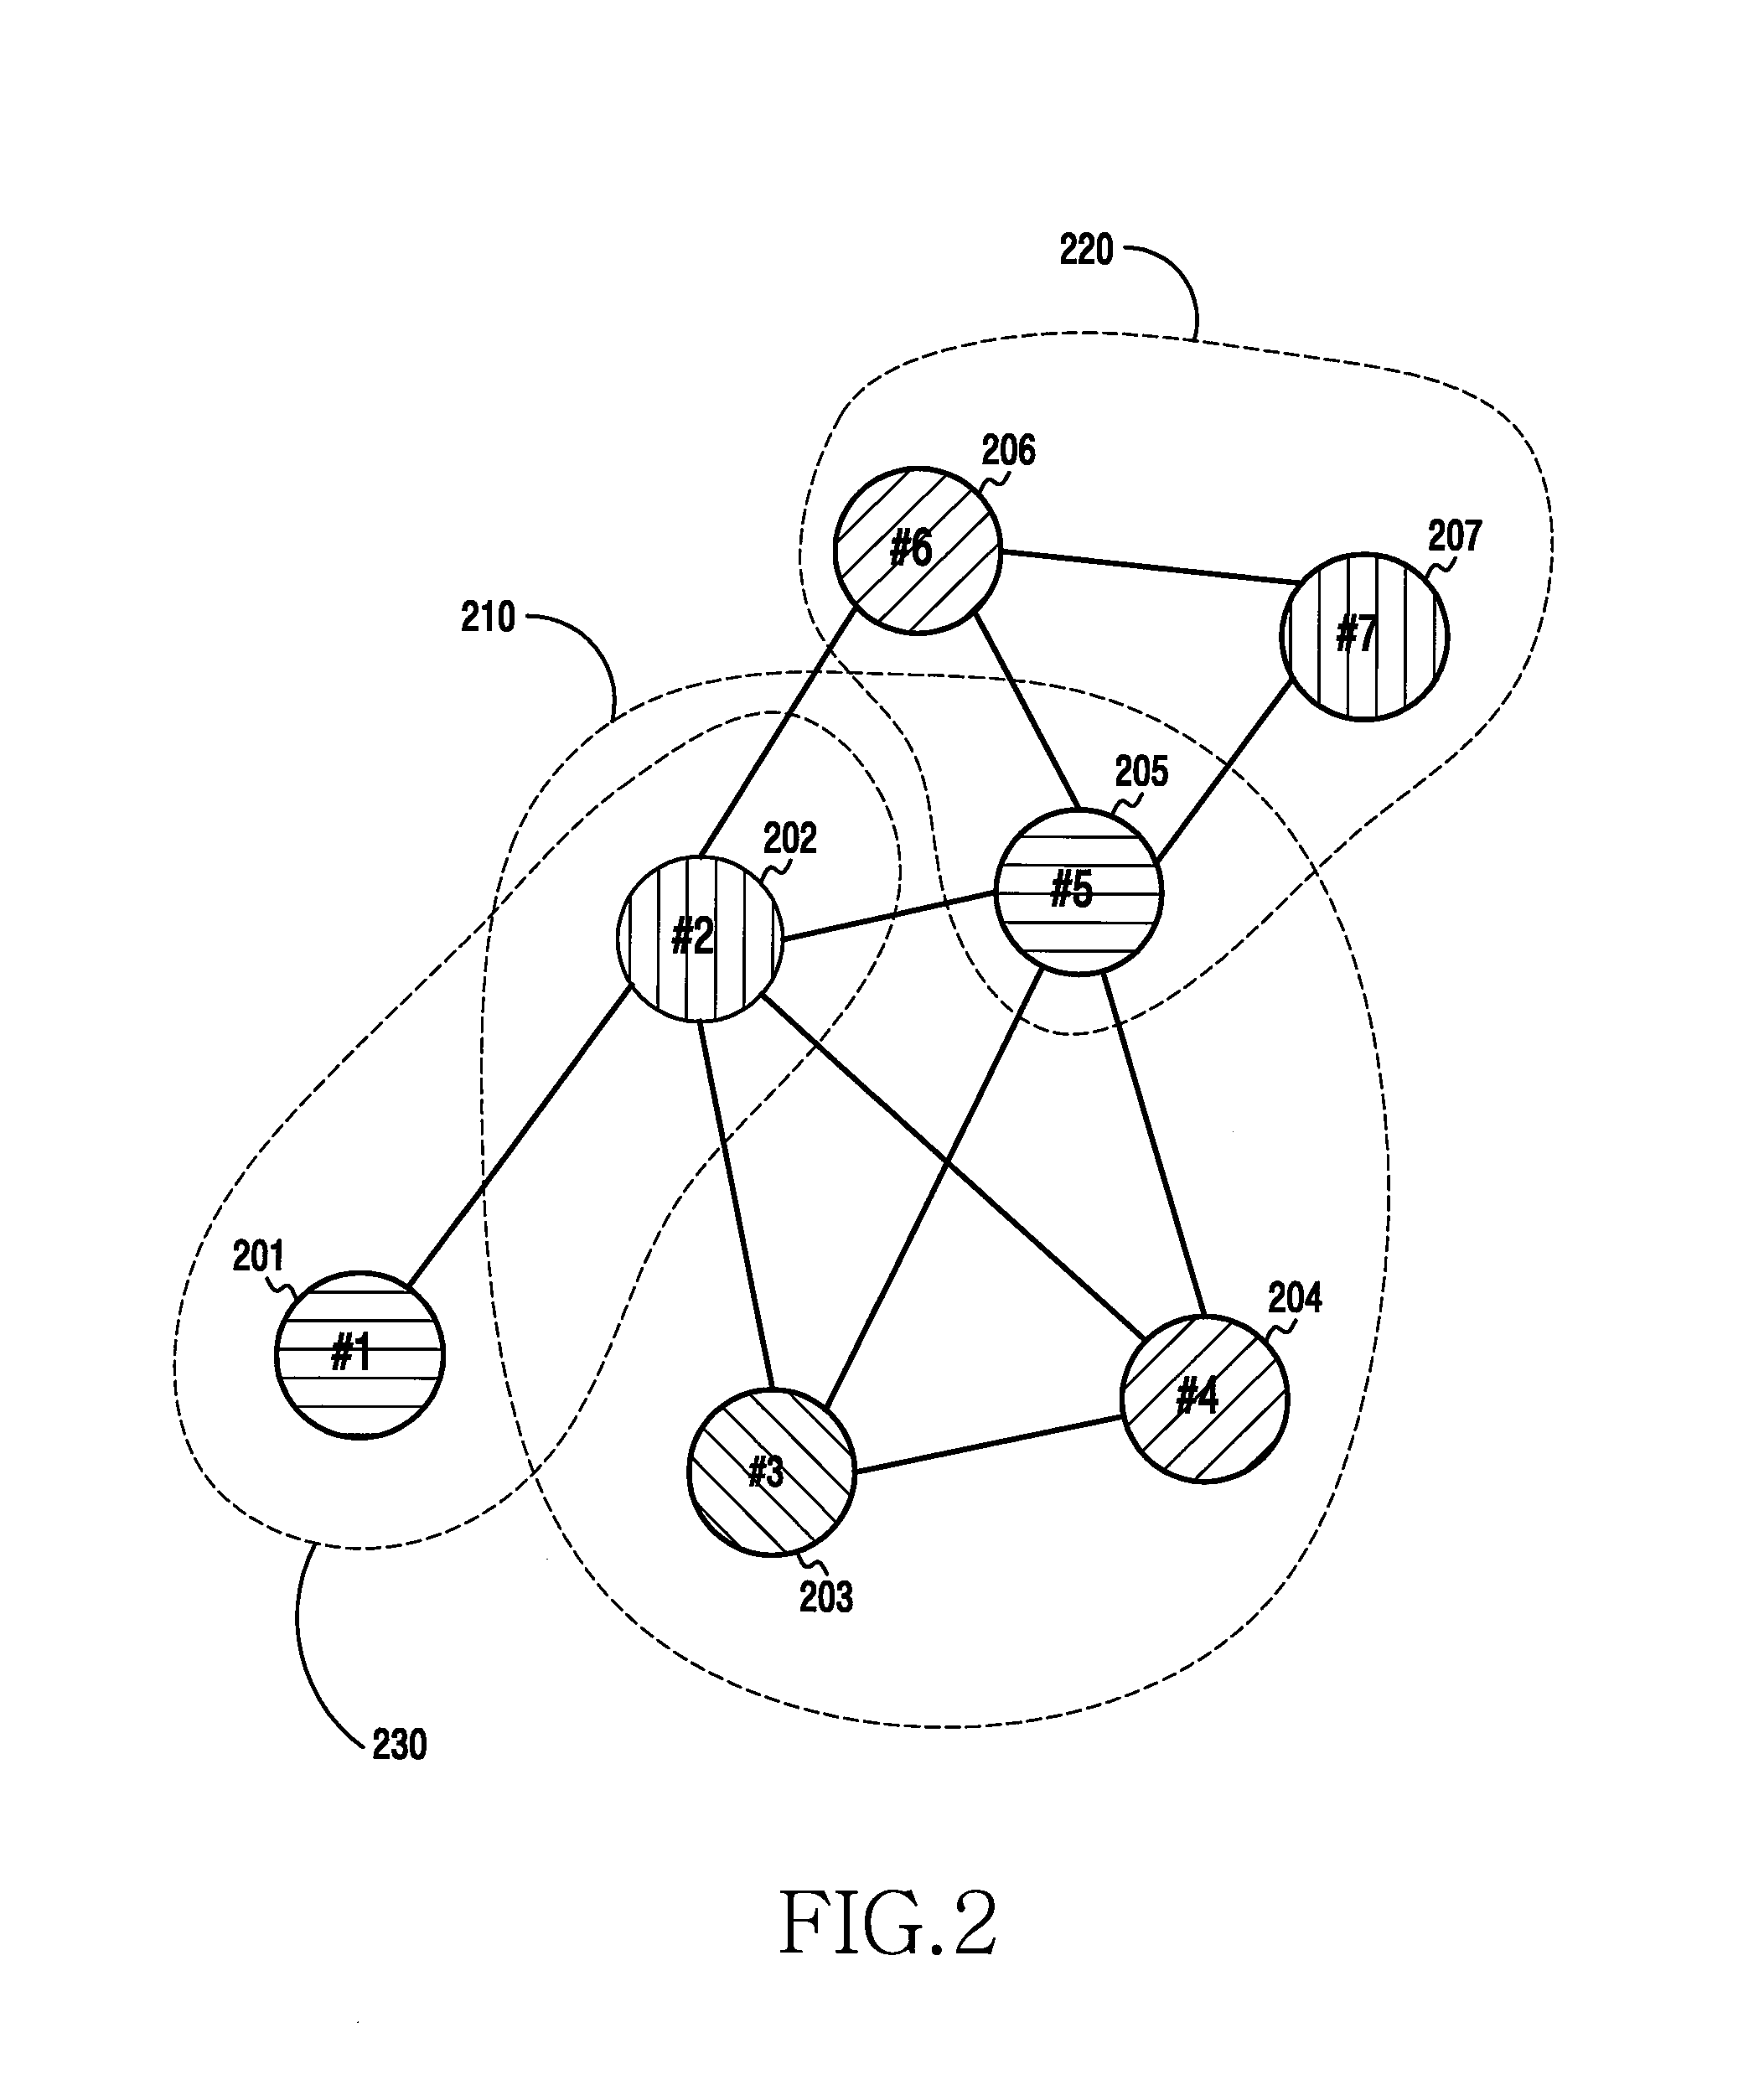 Device and method for analyzing network topology in wireless communication system